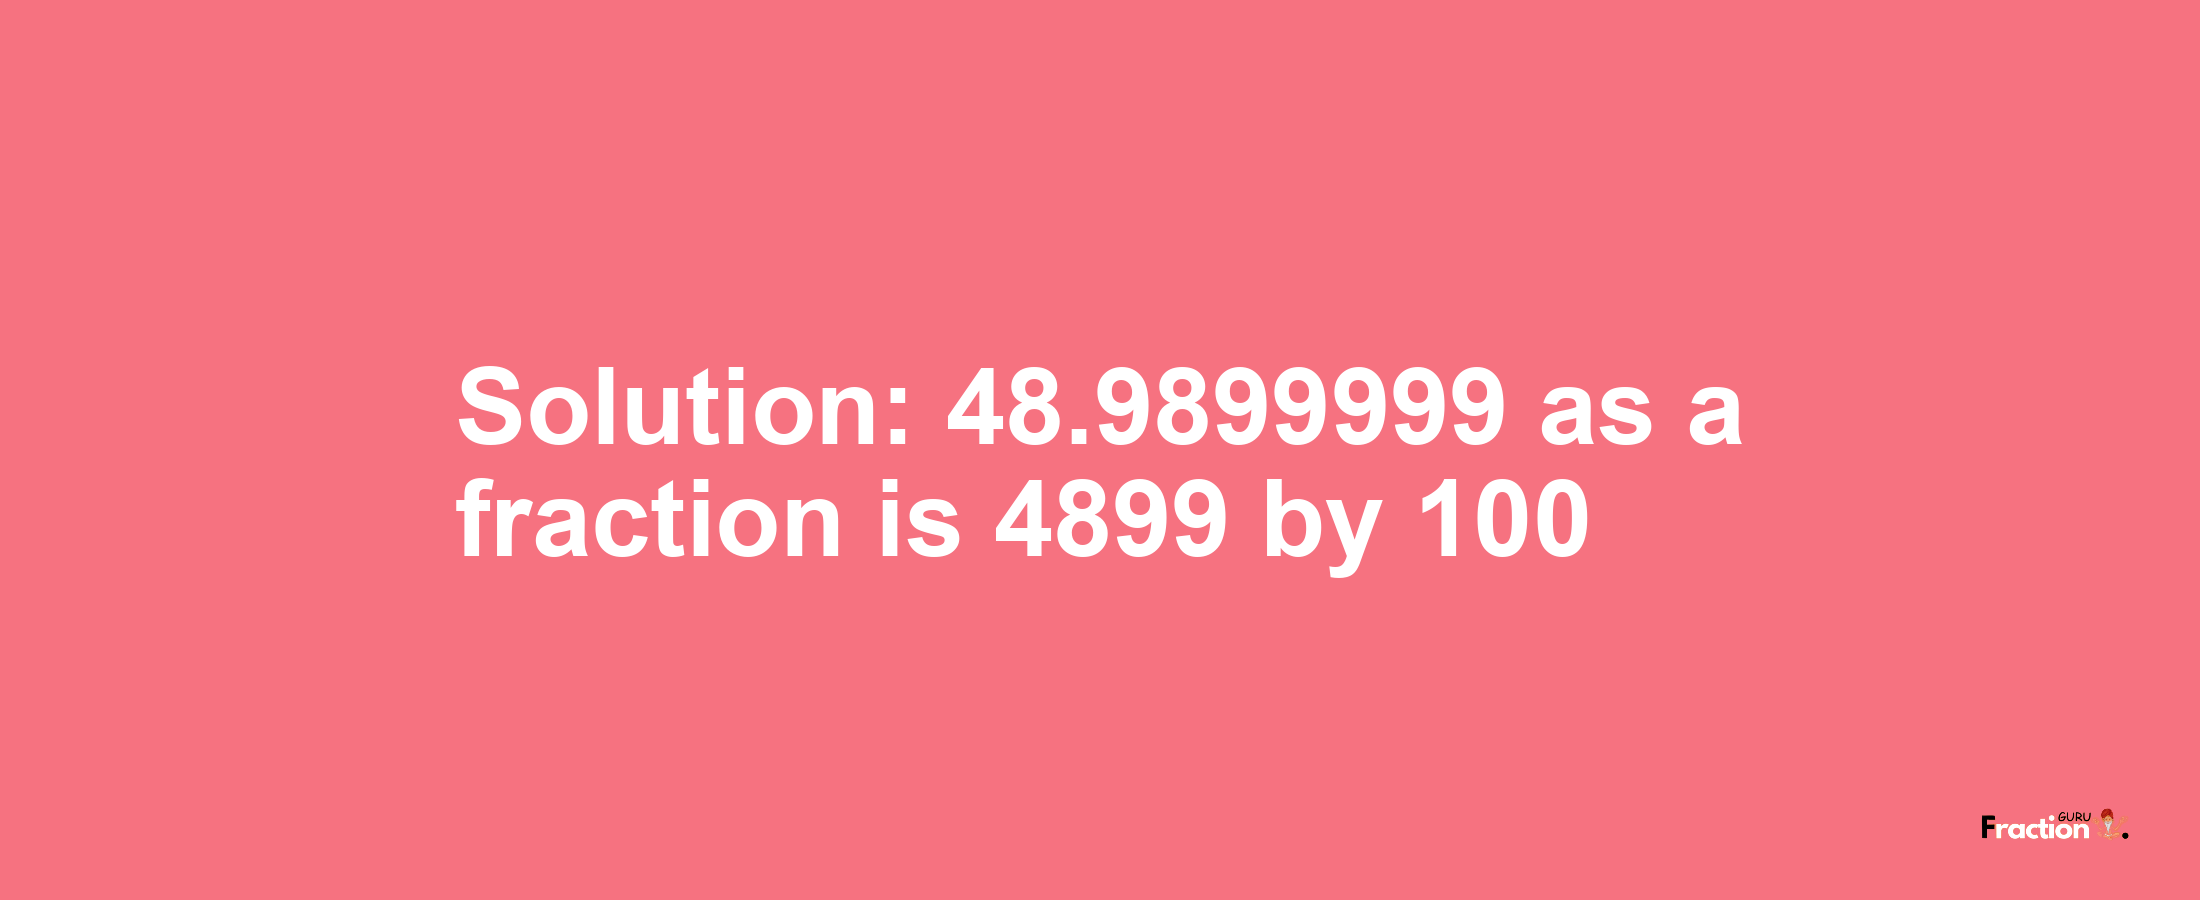 Solution:48.9899999 as a fraction is 4899/100